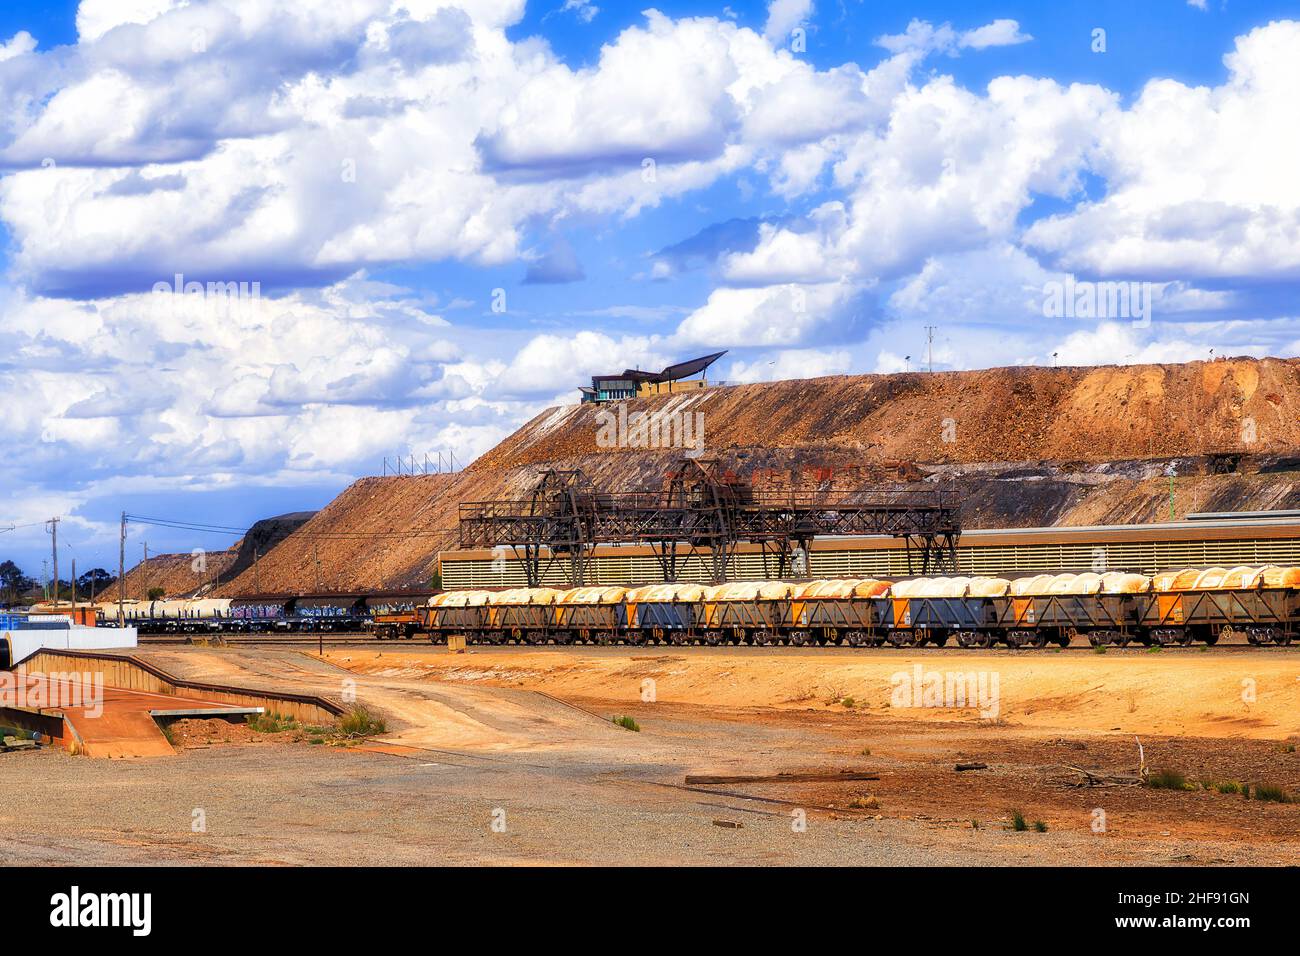 Railway freight trains with wagons of cargo off raw material ore mines in Broken Hill city, Australian OUtback. Stock Photo